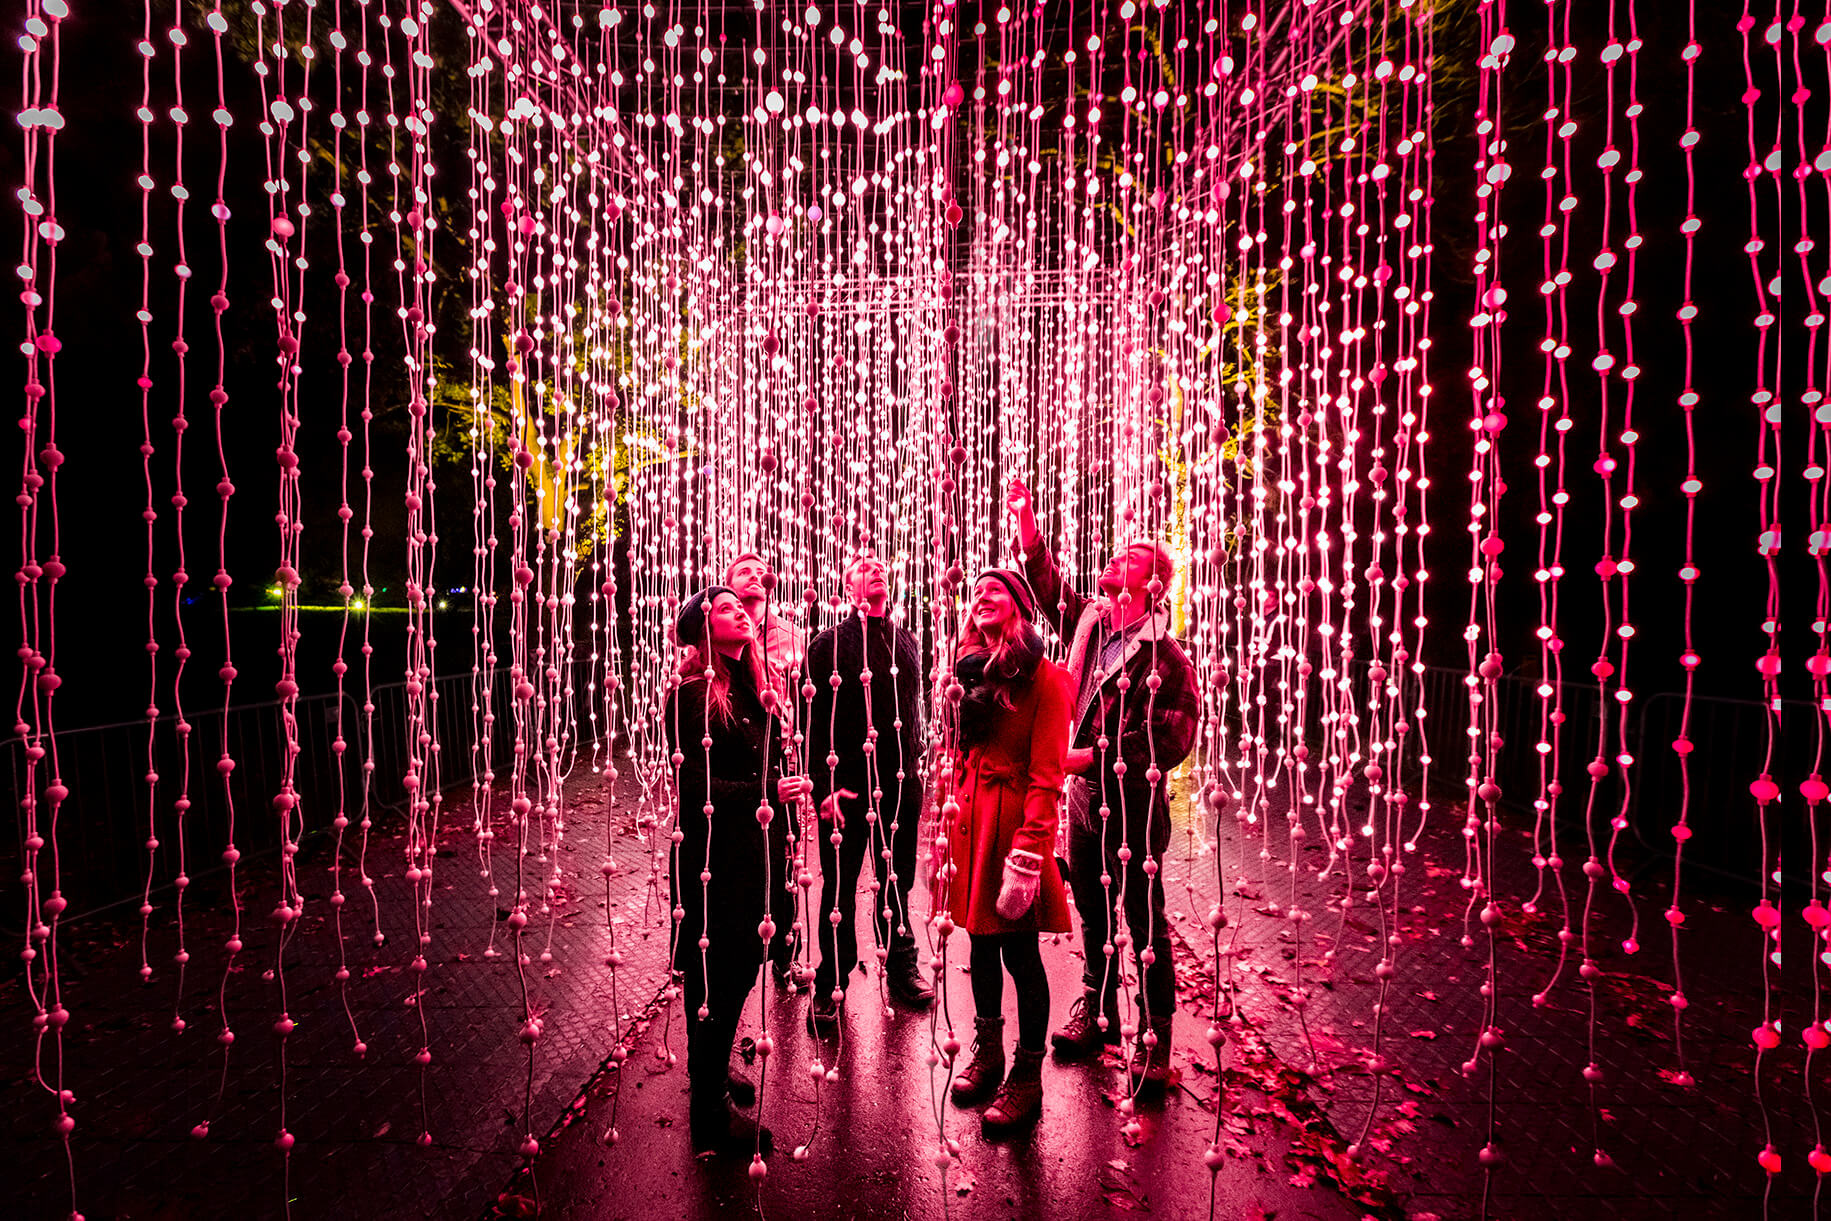 Light up the night: ‘Lightscape’ brings dazzling holiday display to the ...